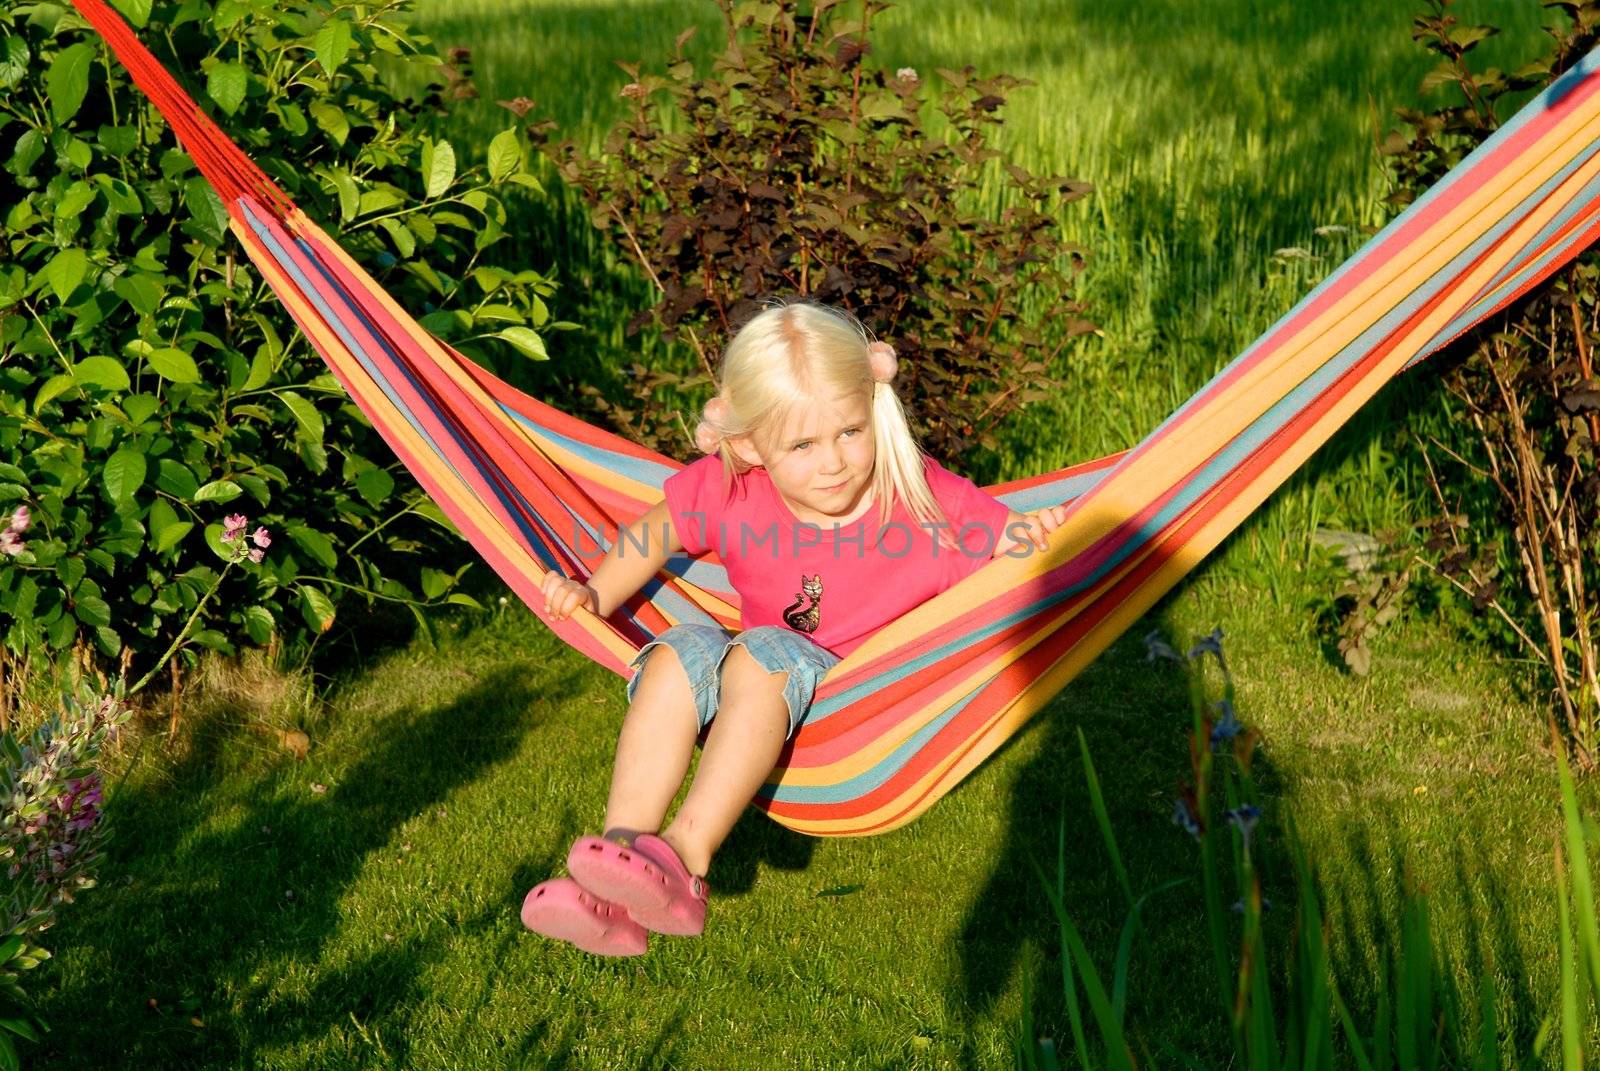 a girl playing on the pink hammock in garden. Please note: No negative use allowed.